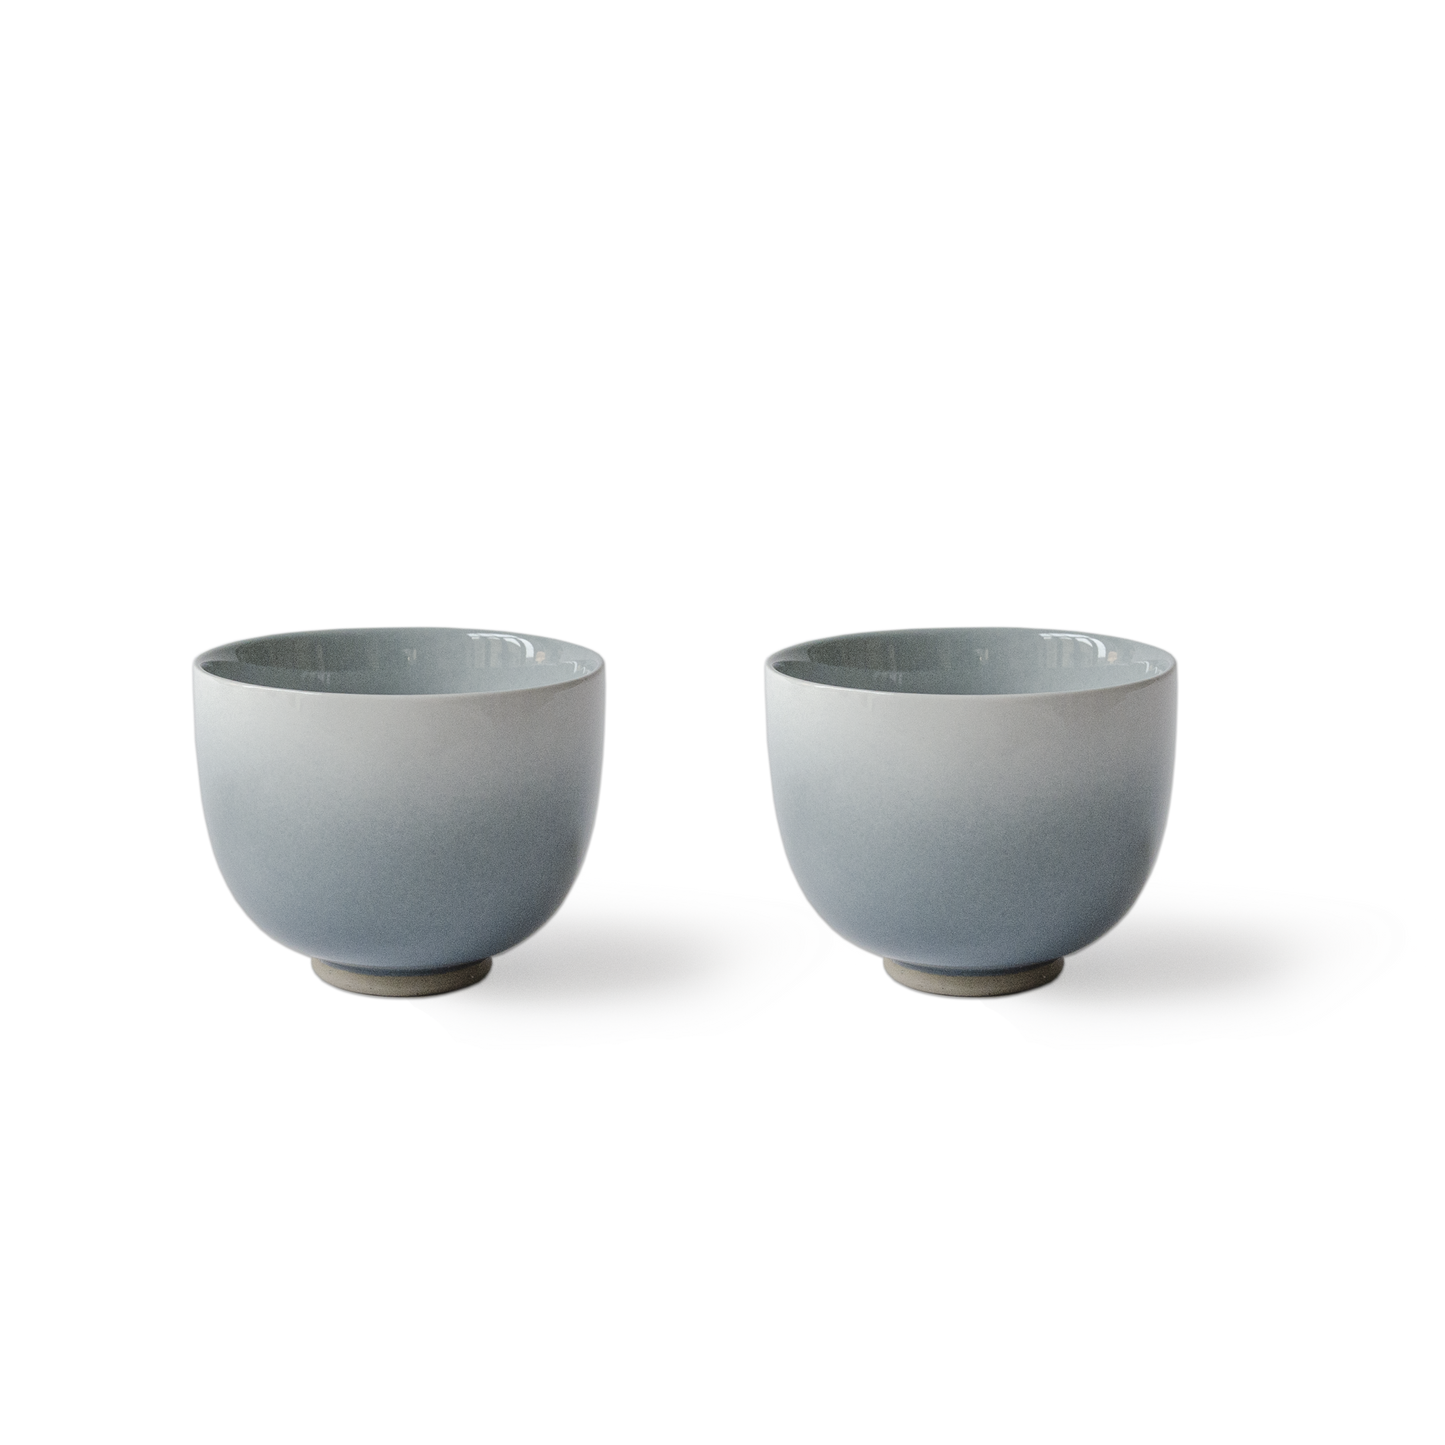 KYO Cup Light 2 Pcs by Mazo #Tinted Glass